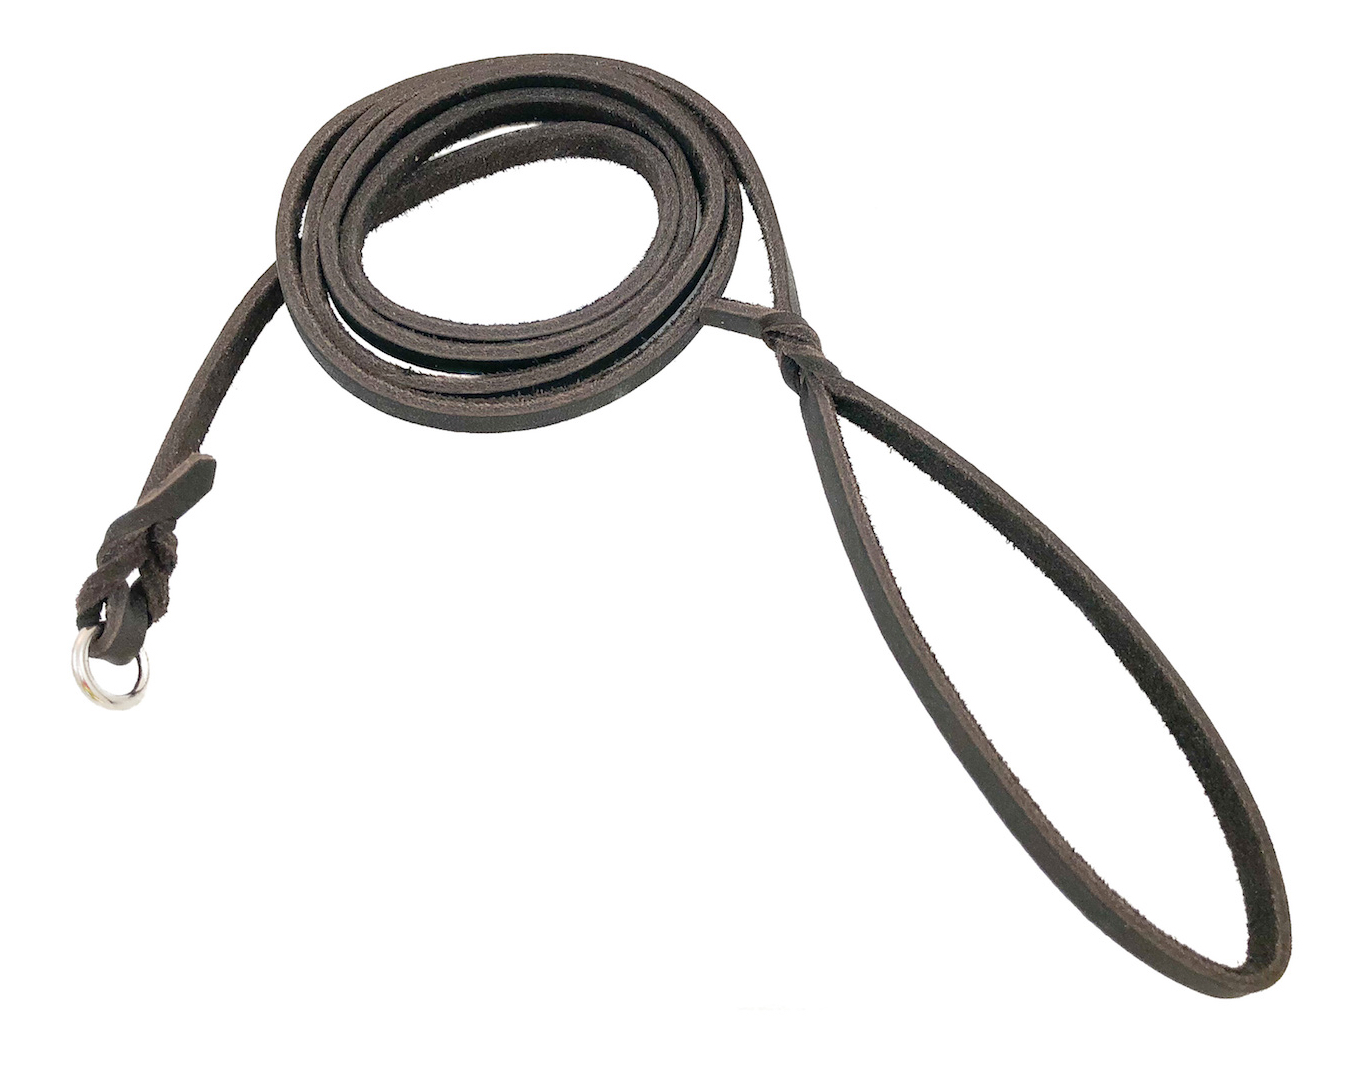  White Pine Leather Show Slip Lead 36” in Chocolate. 